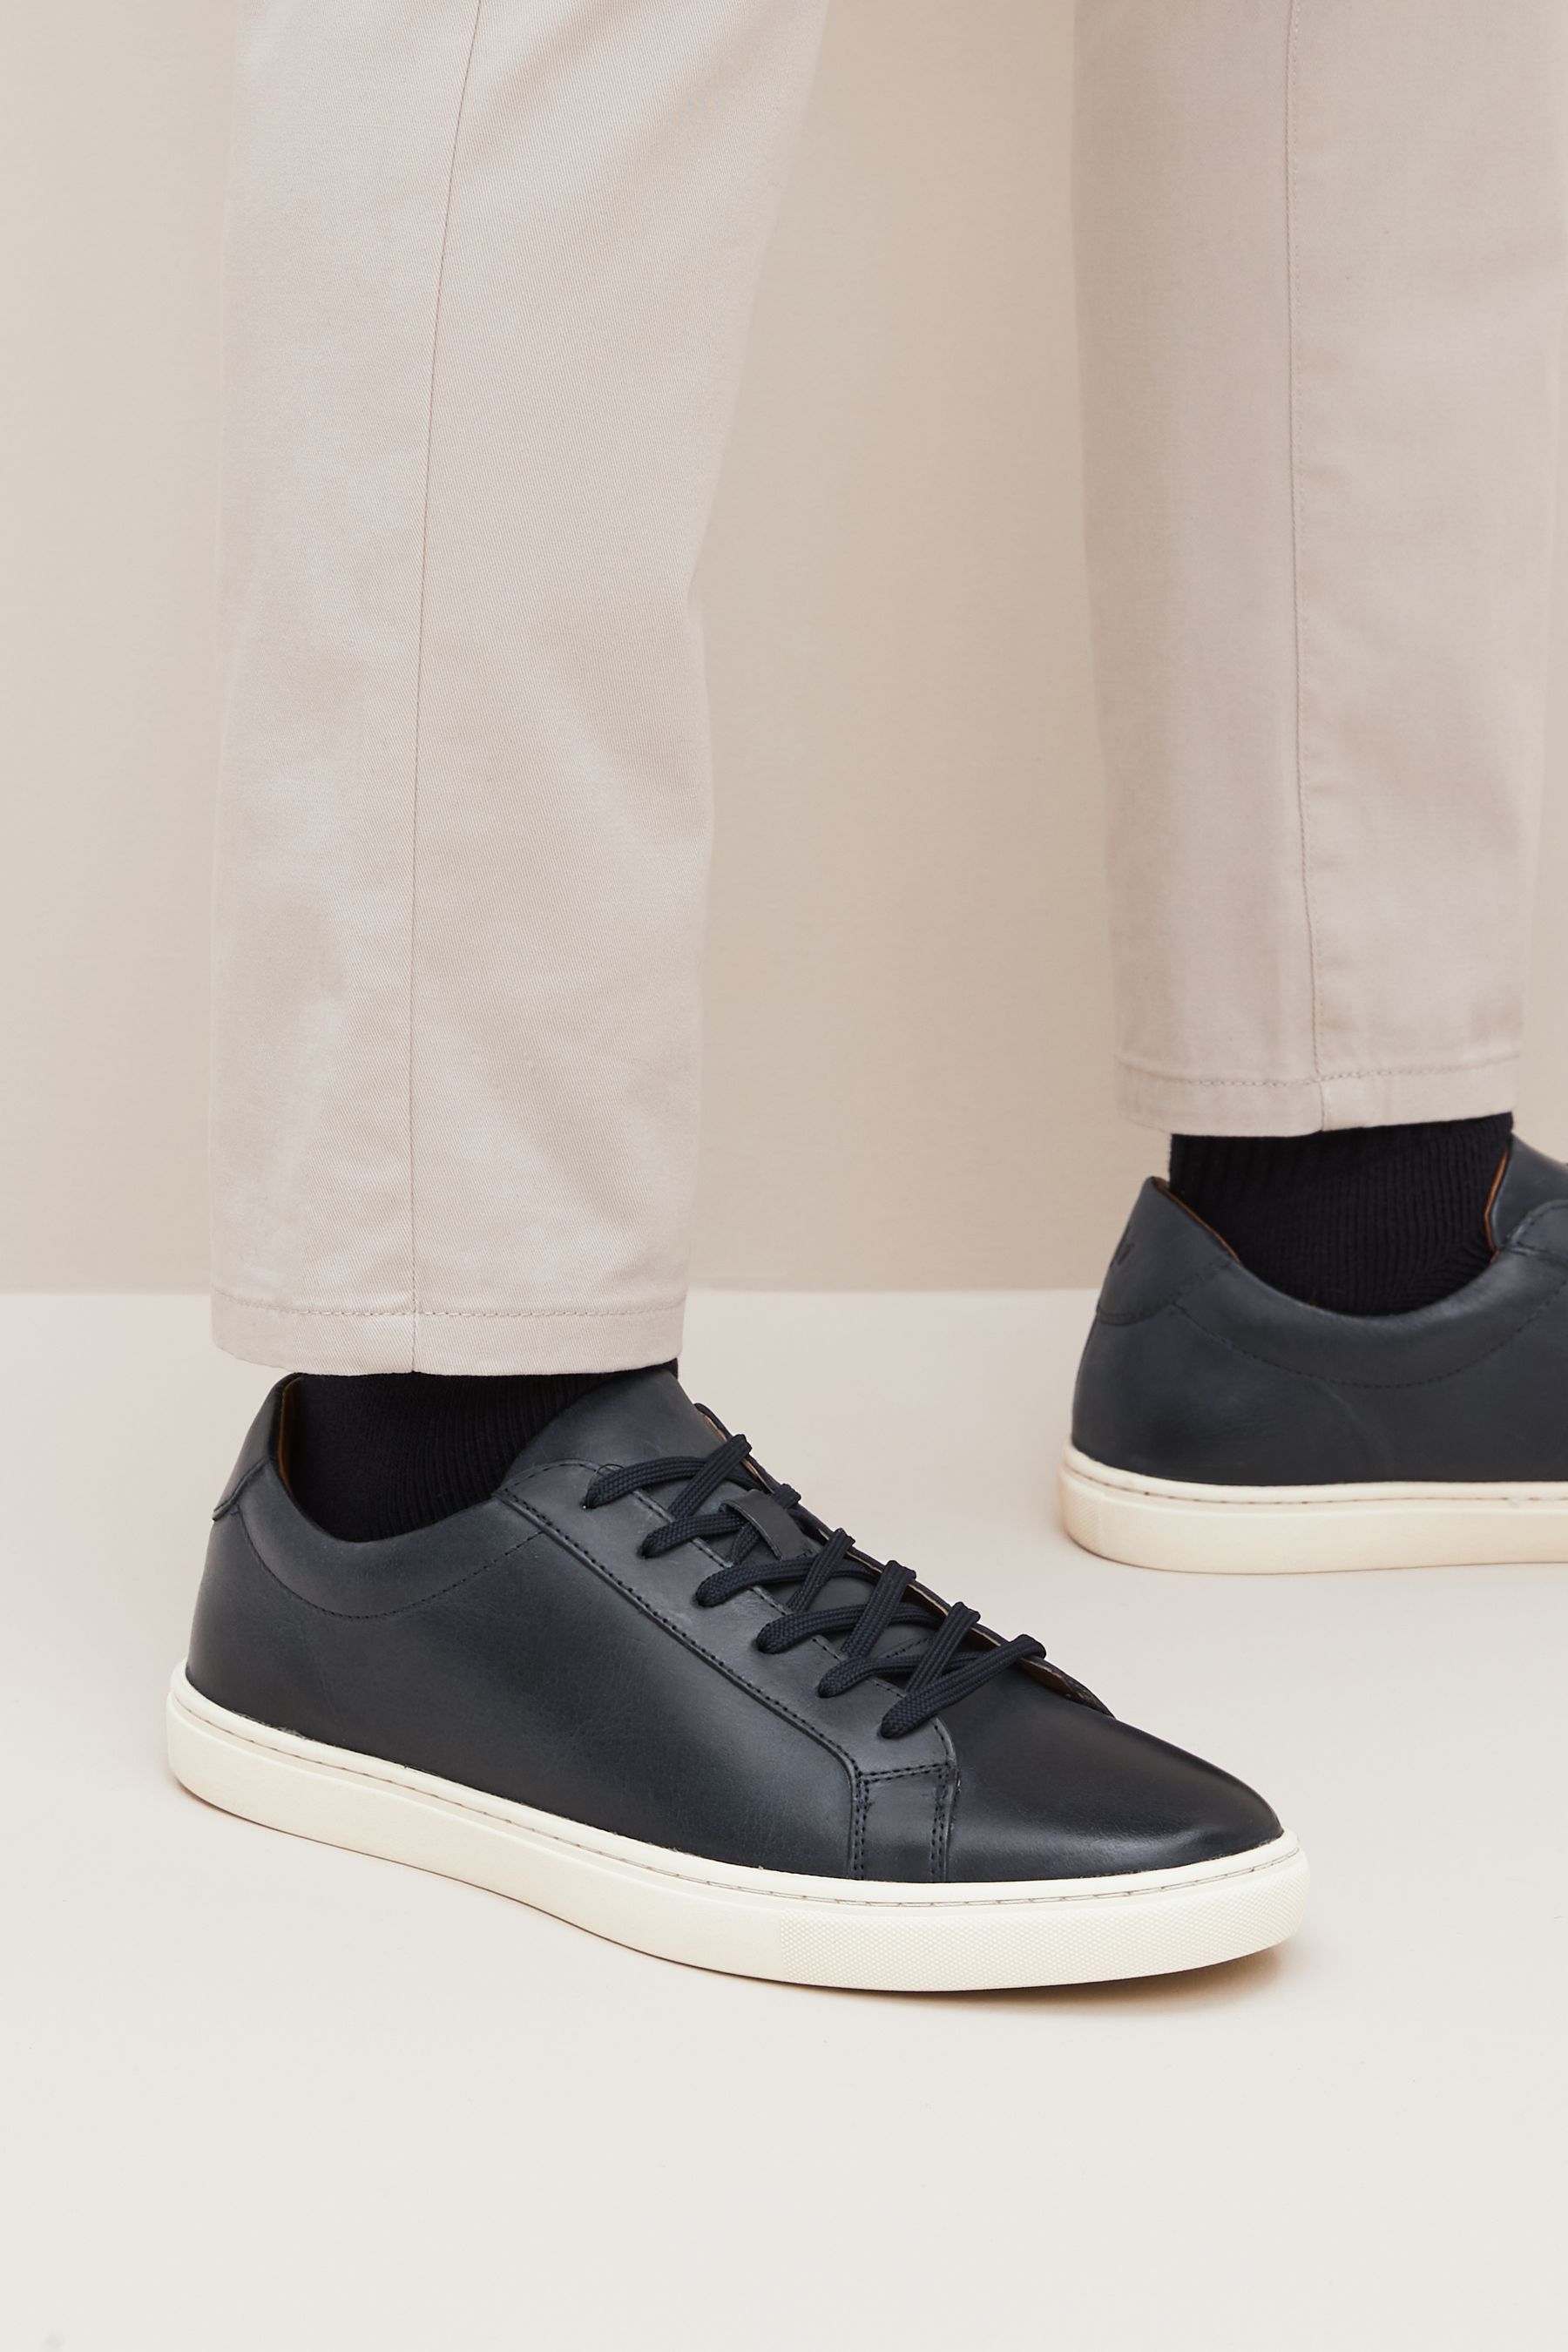 Buy Navy Blue Leather Trainers from the Next UK online shop